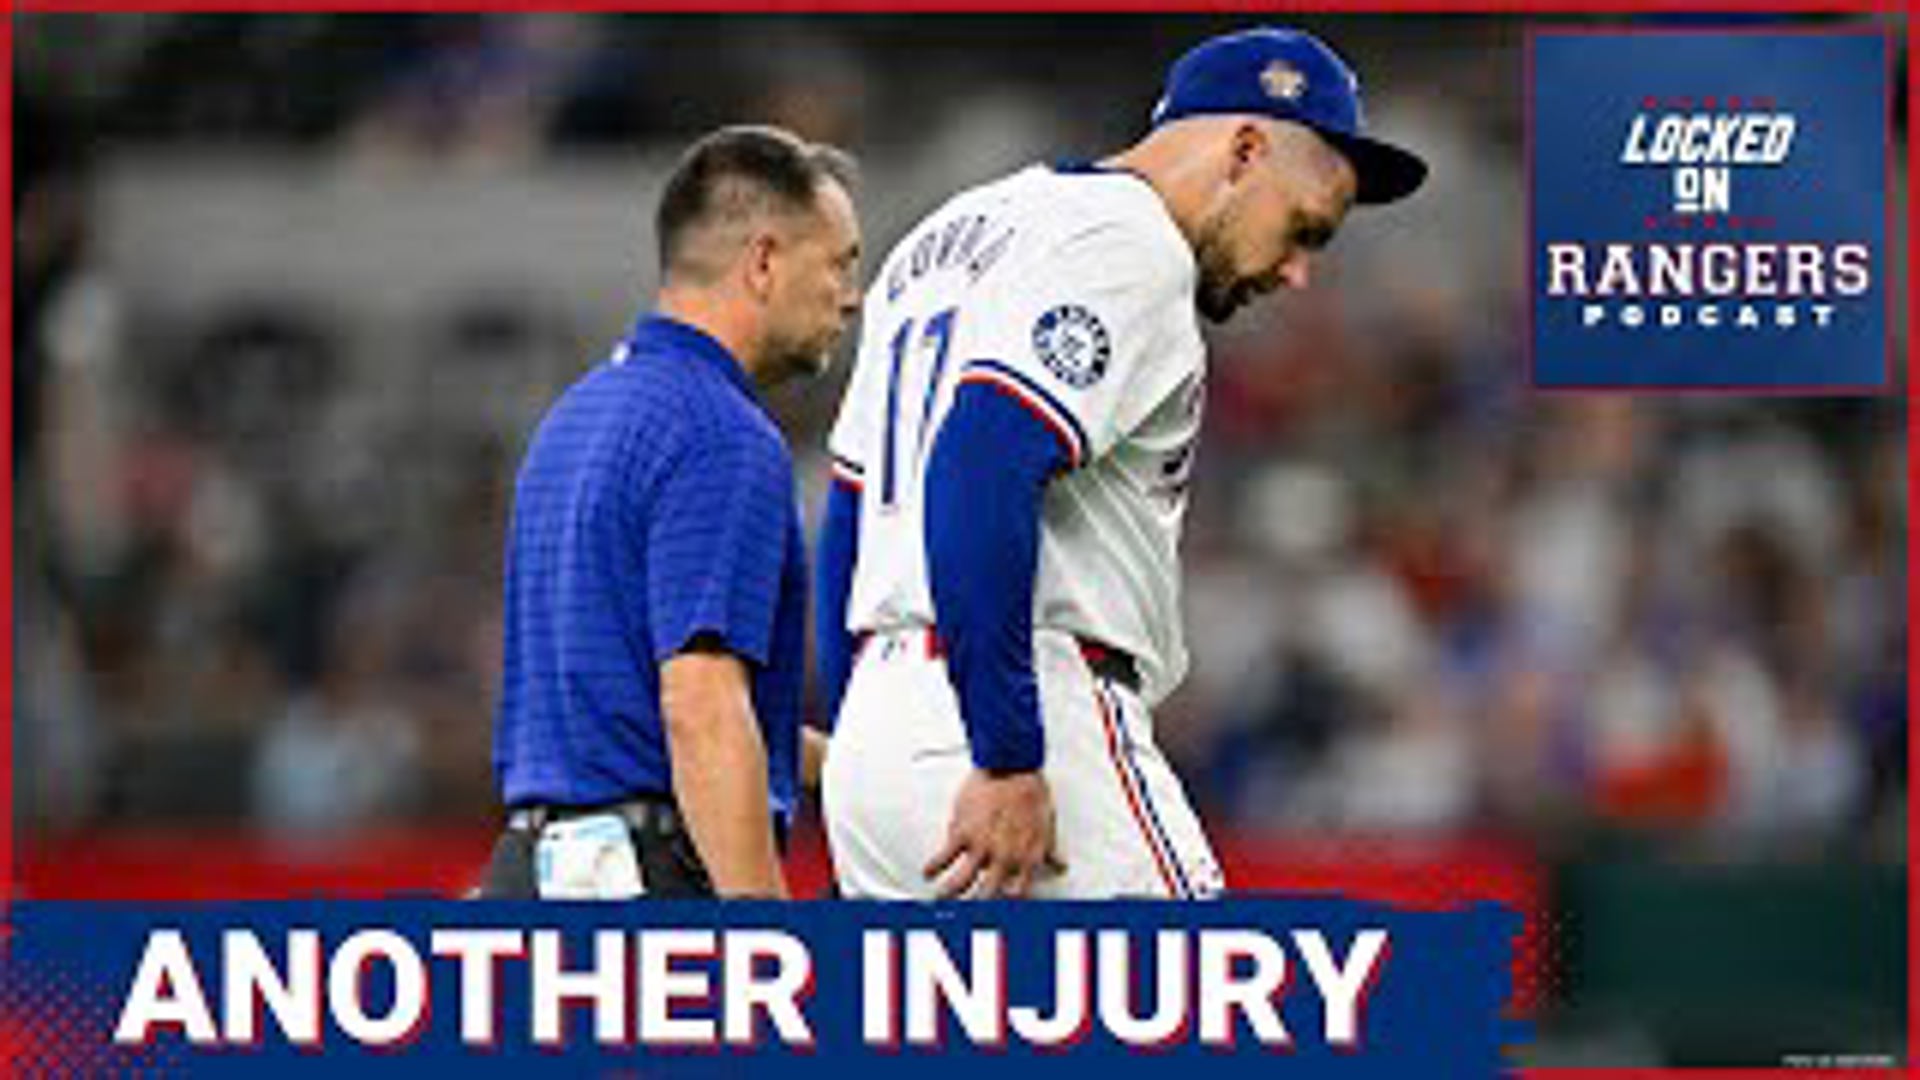 The Texas Rangers won the series against the Washington Nationals but ace Nathan Eovaldi left the game with a right groin strain.